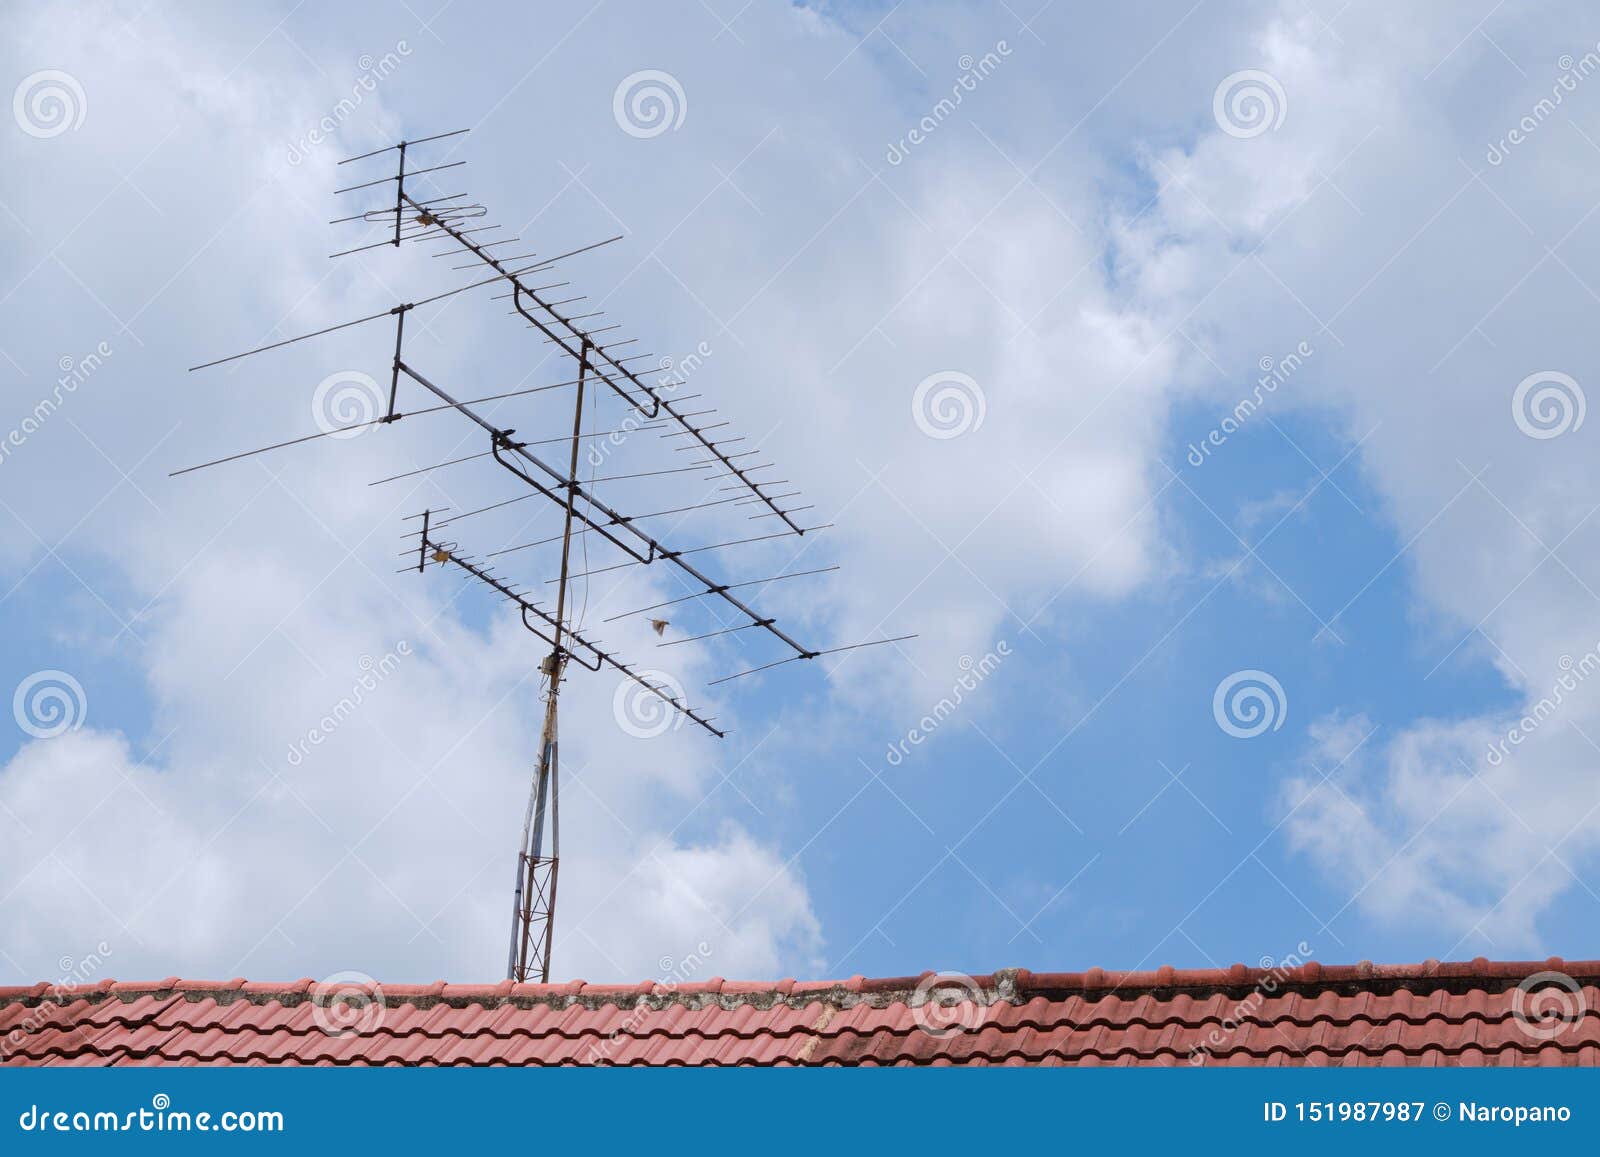 Tv Antenna On The Roof Of The House Stock Image Image Of White Vintage